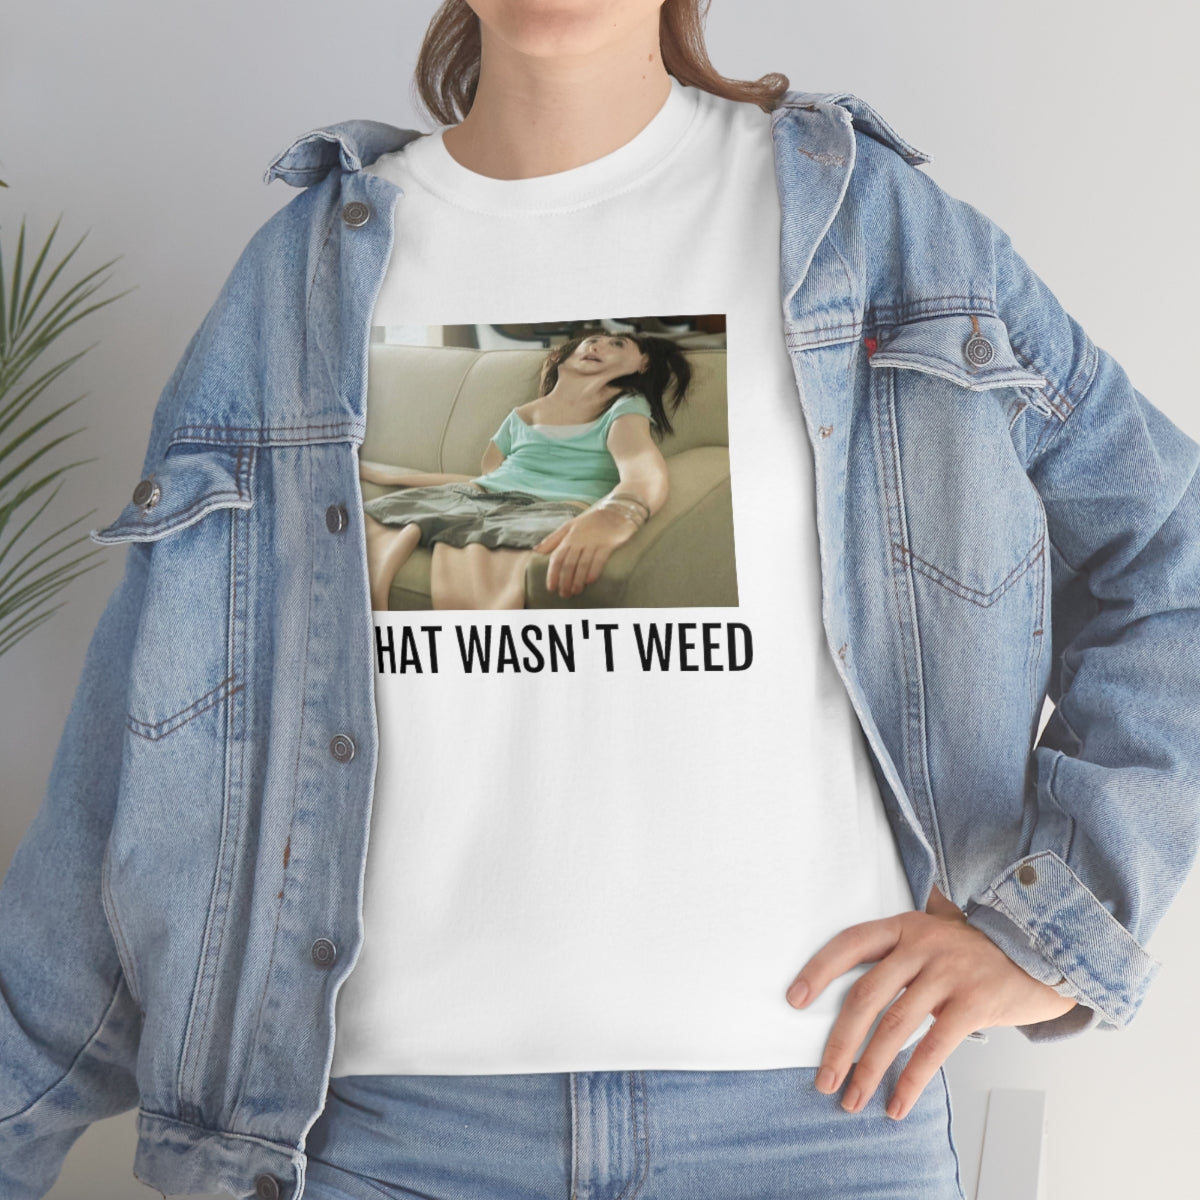 THAT WASN'T WEED T-SHIRT